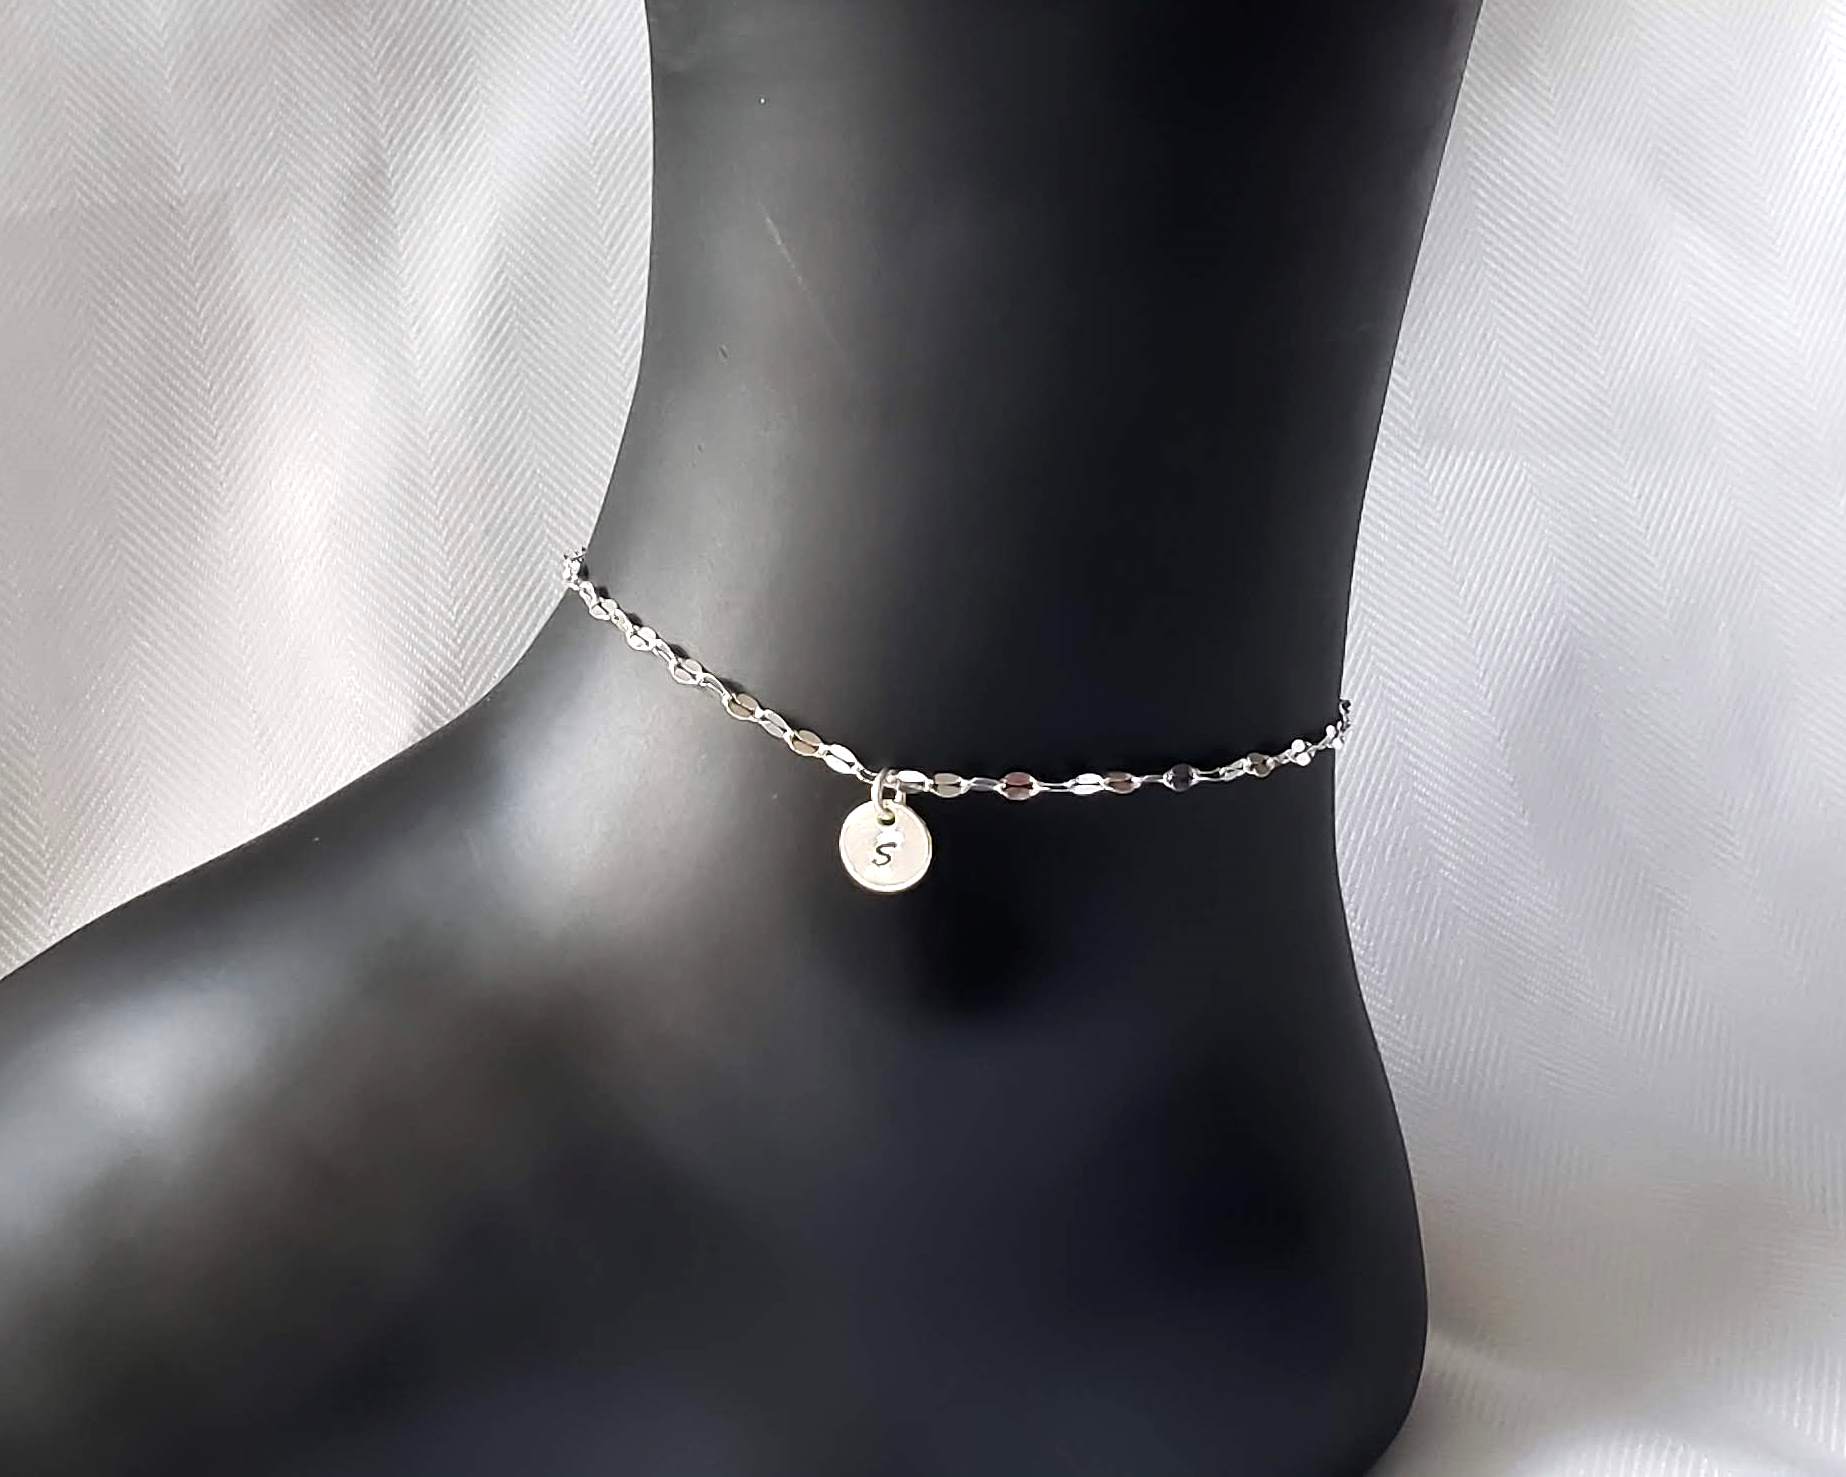 Luxurious Initial Anklet-Ankle Bracelet-Handmade-Sterling Silver-Personalized-Hand Stamped Initial